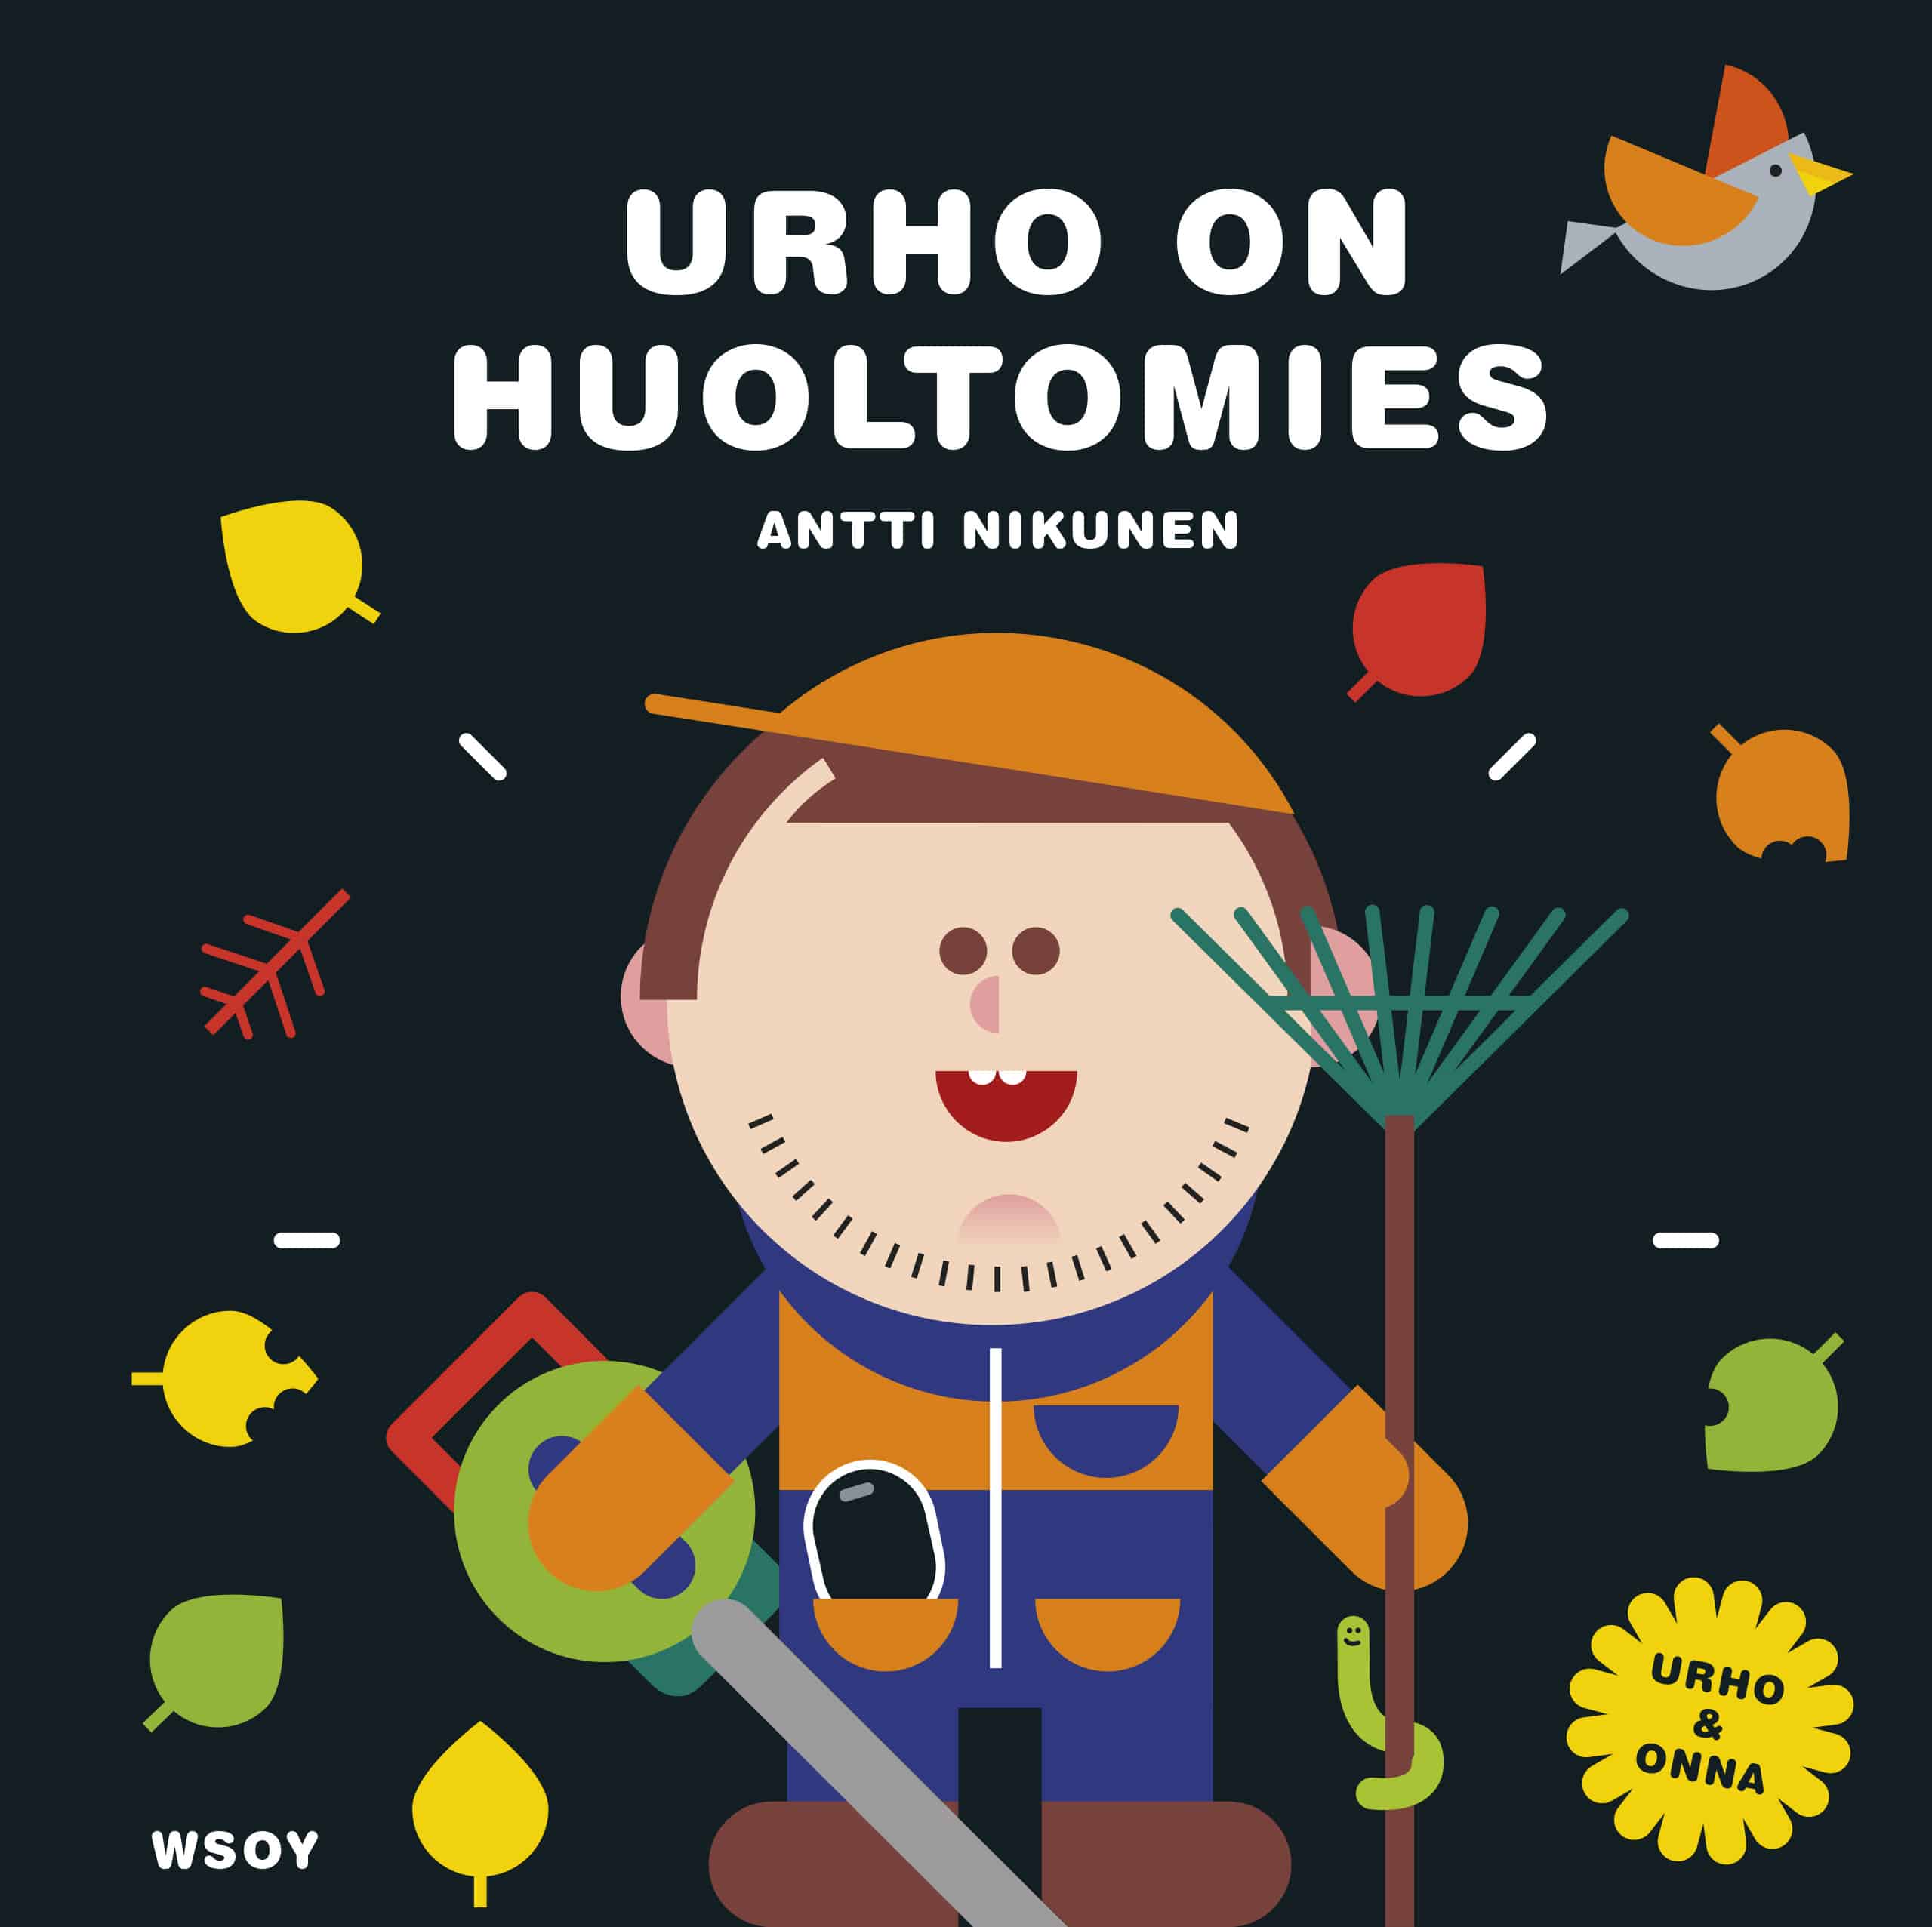 Urho on huoltomies